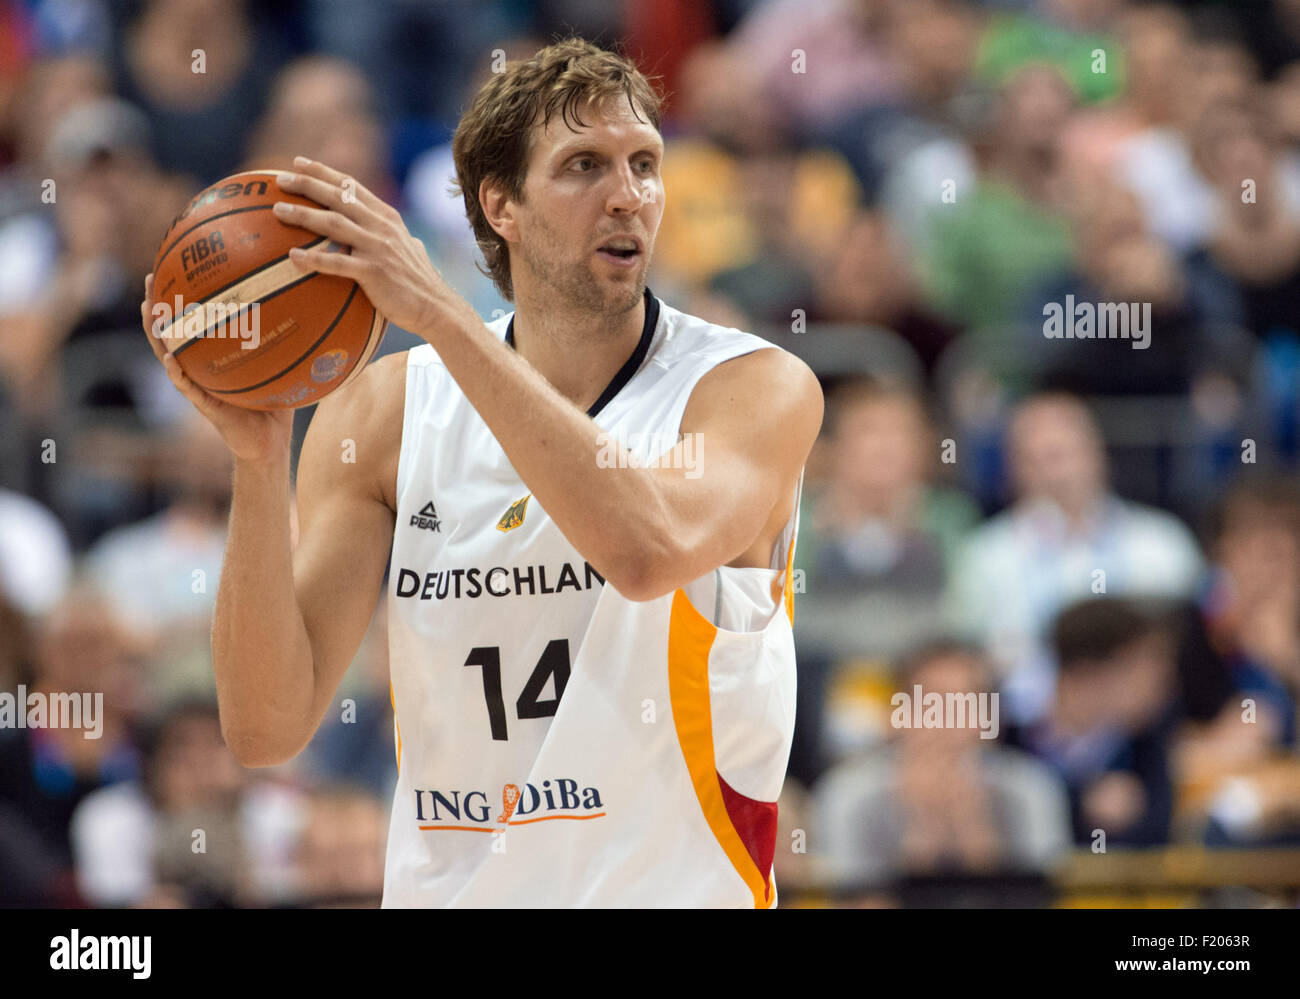 Berlin, Germany. 08th Sep, 2015. Germany's Dirk Nowitzki in action during the FIBA EuroBasket 2015 Group B match between Germany and Turkey, at the Mercedes-Benz-Arena in Berlin, Germany, 08 September 2015. Germany lost 75:80. Photo: Lukas Schulze/dpa/Alamy Live News Stock Photo